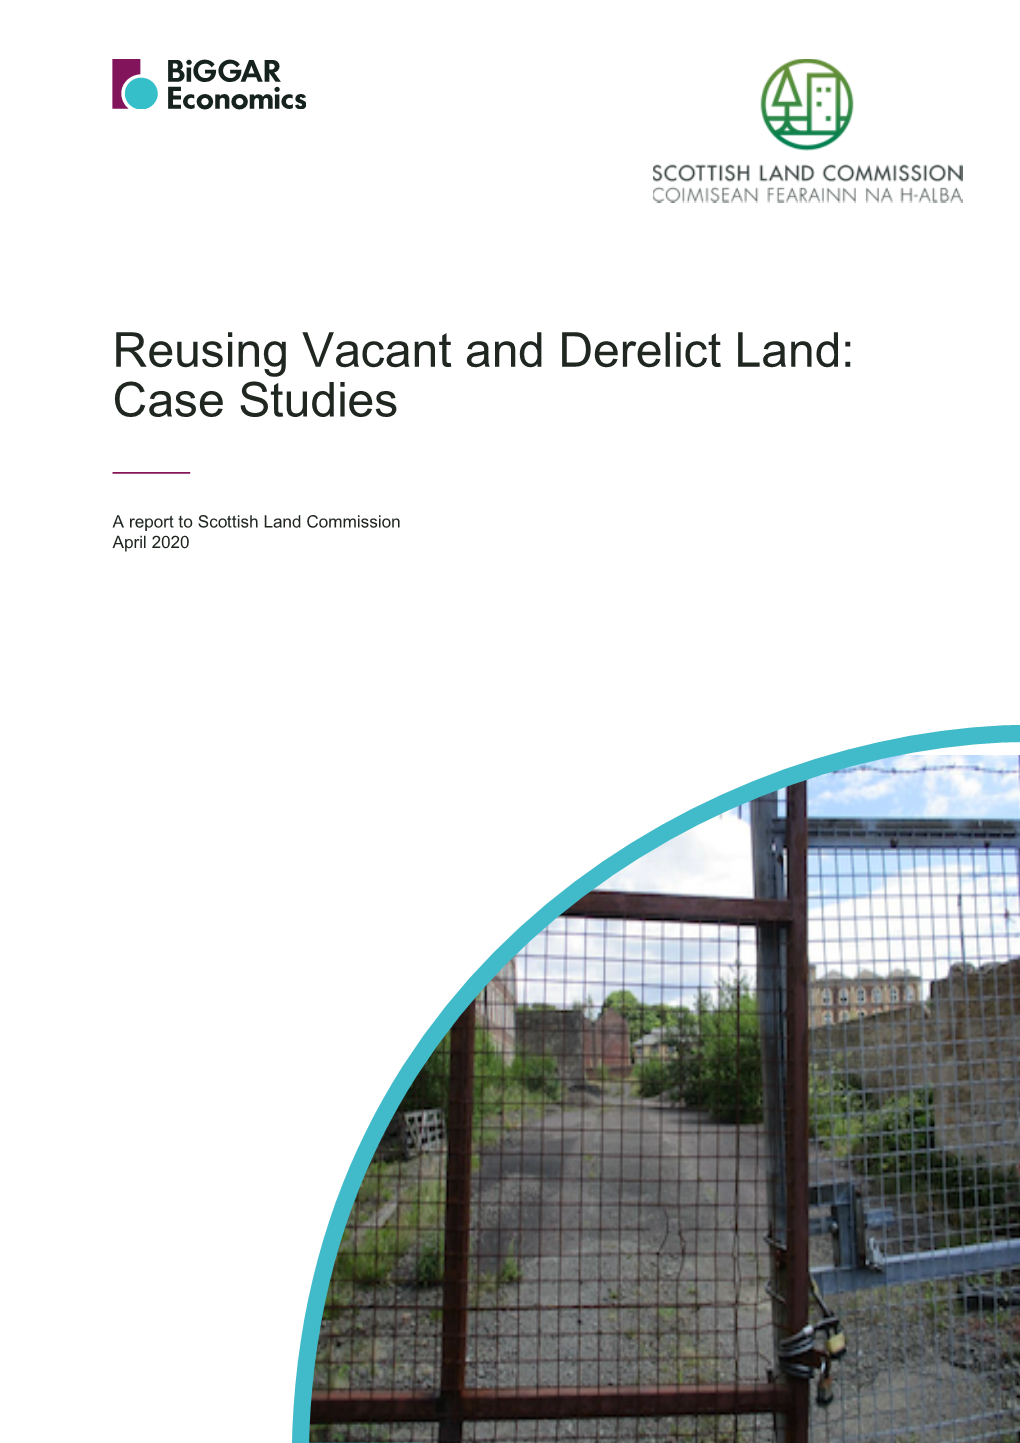 Reusing Vacant and Derelict Land: Case Studies